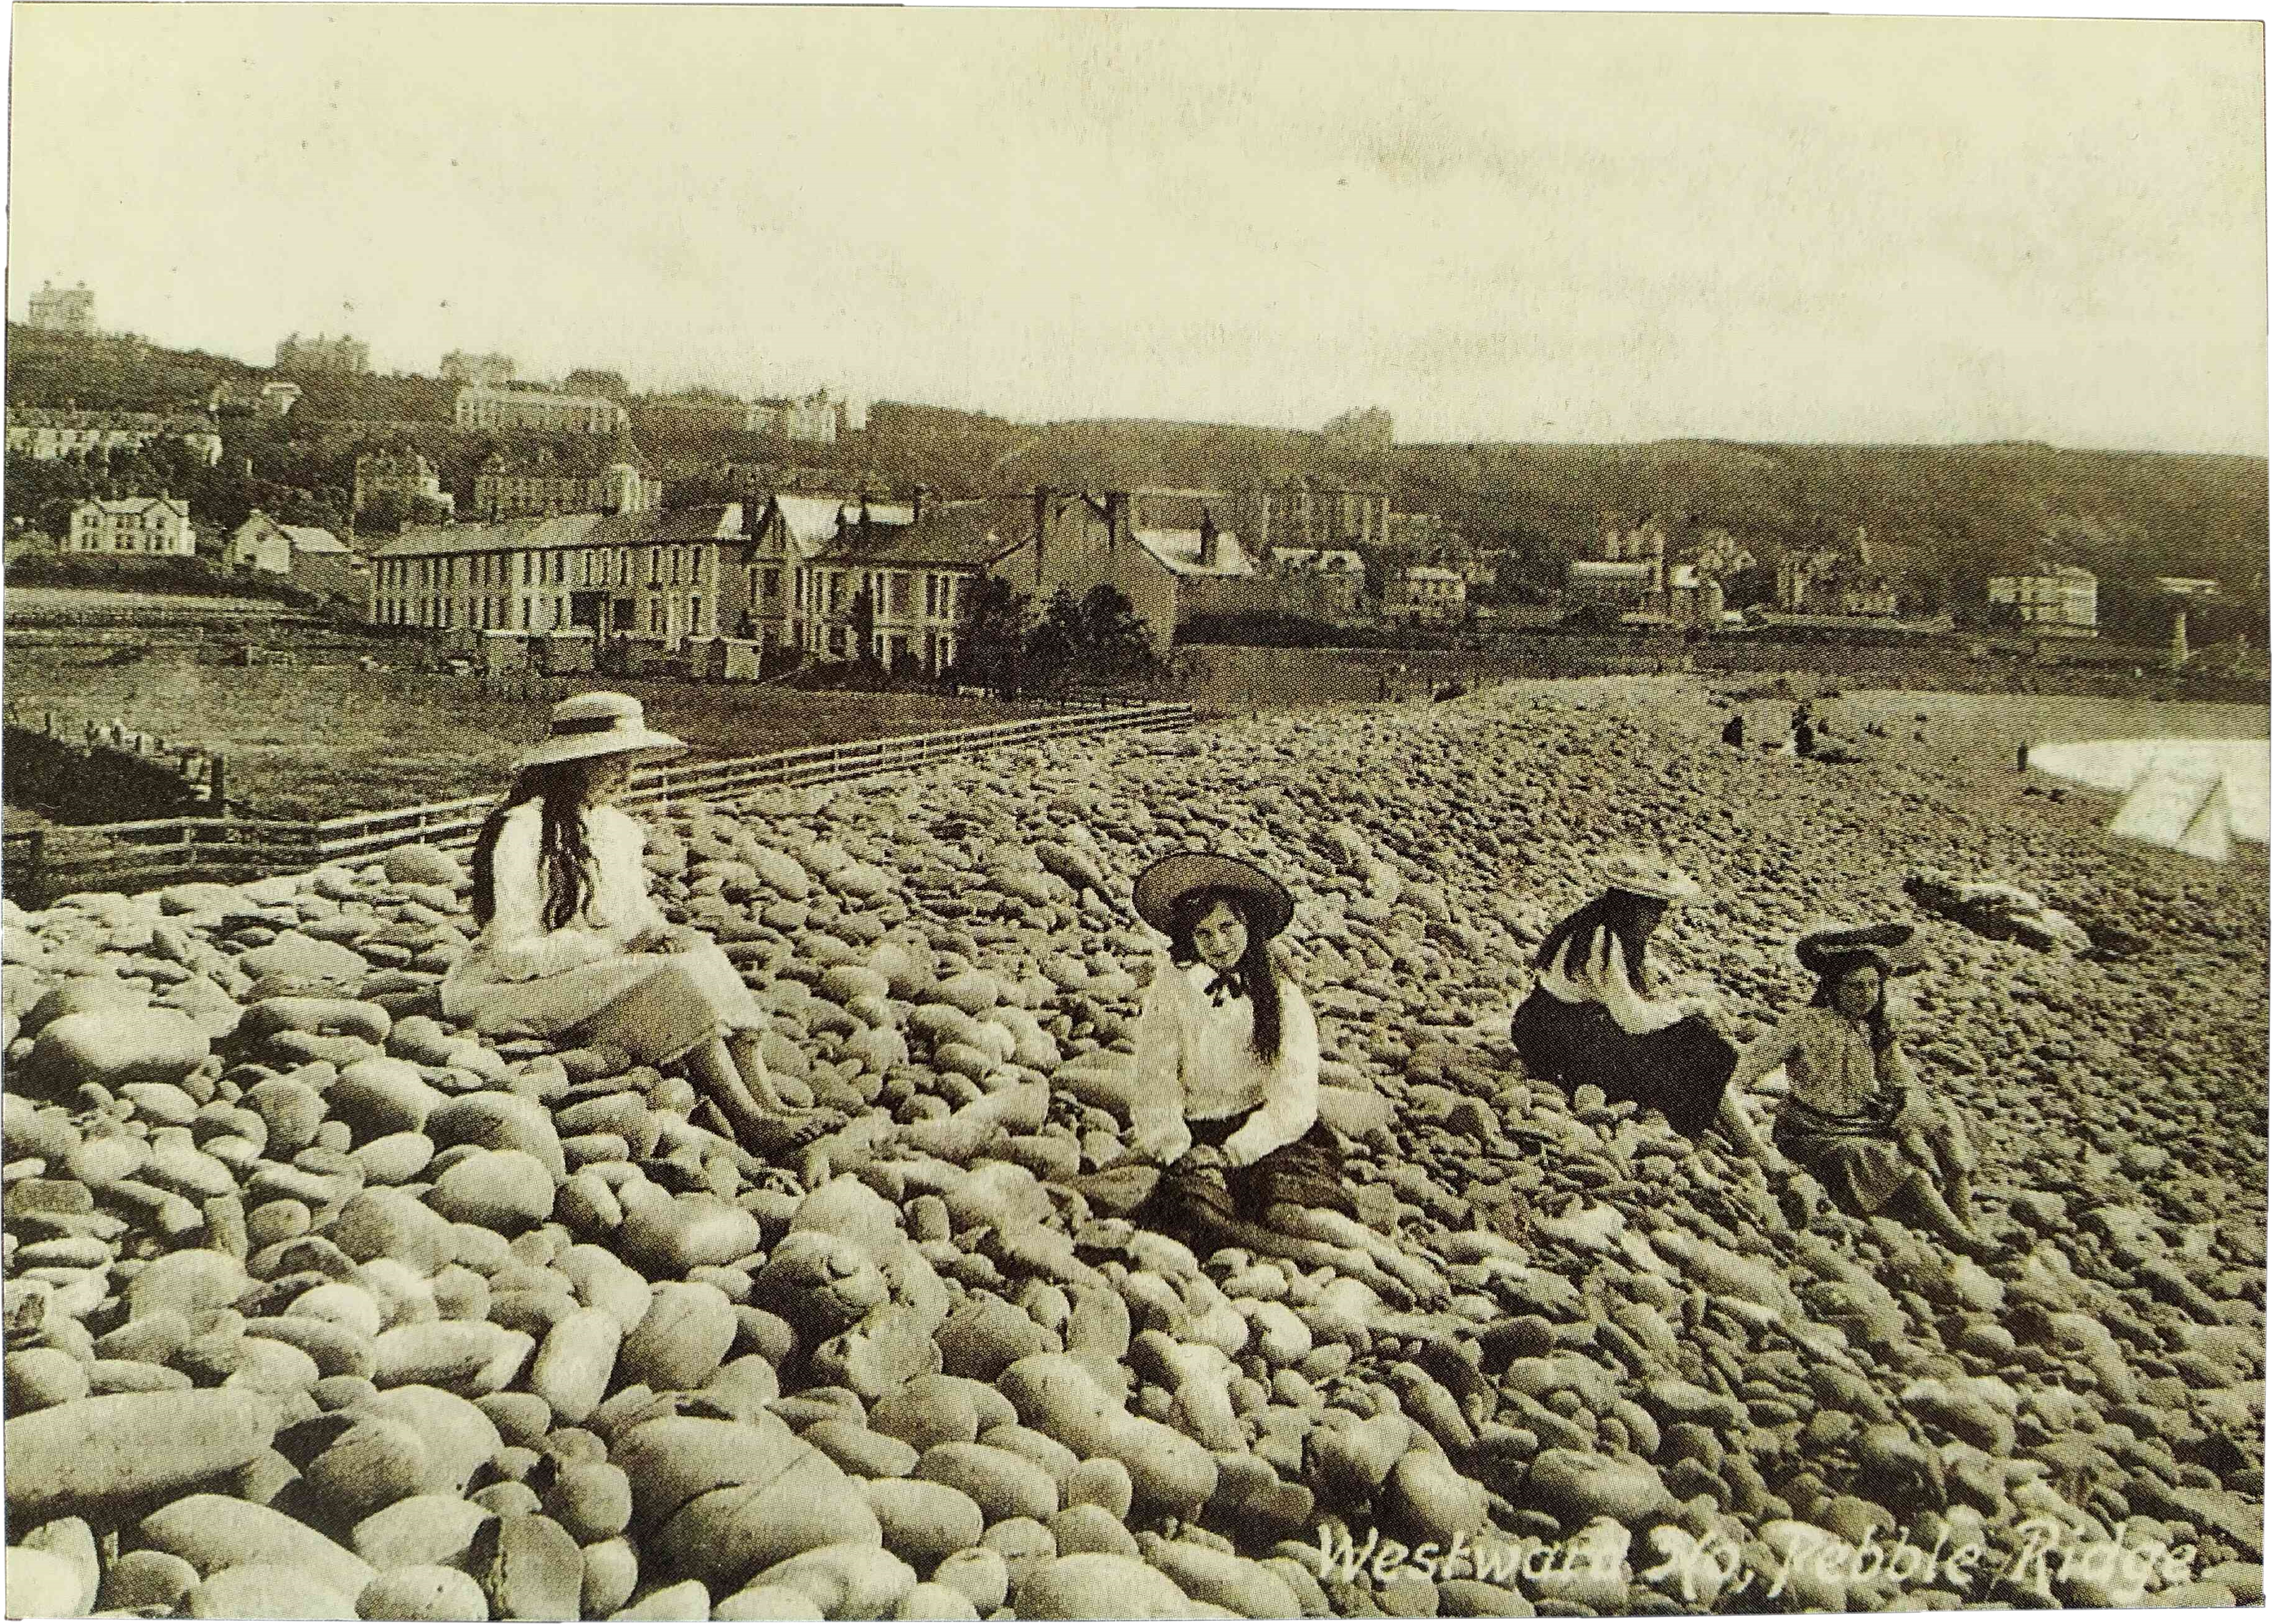 An old black and white photograph of four women and girls in Edwardian clothing sitting on a pebble beach